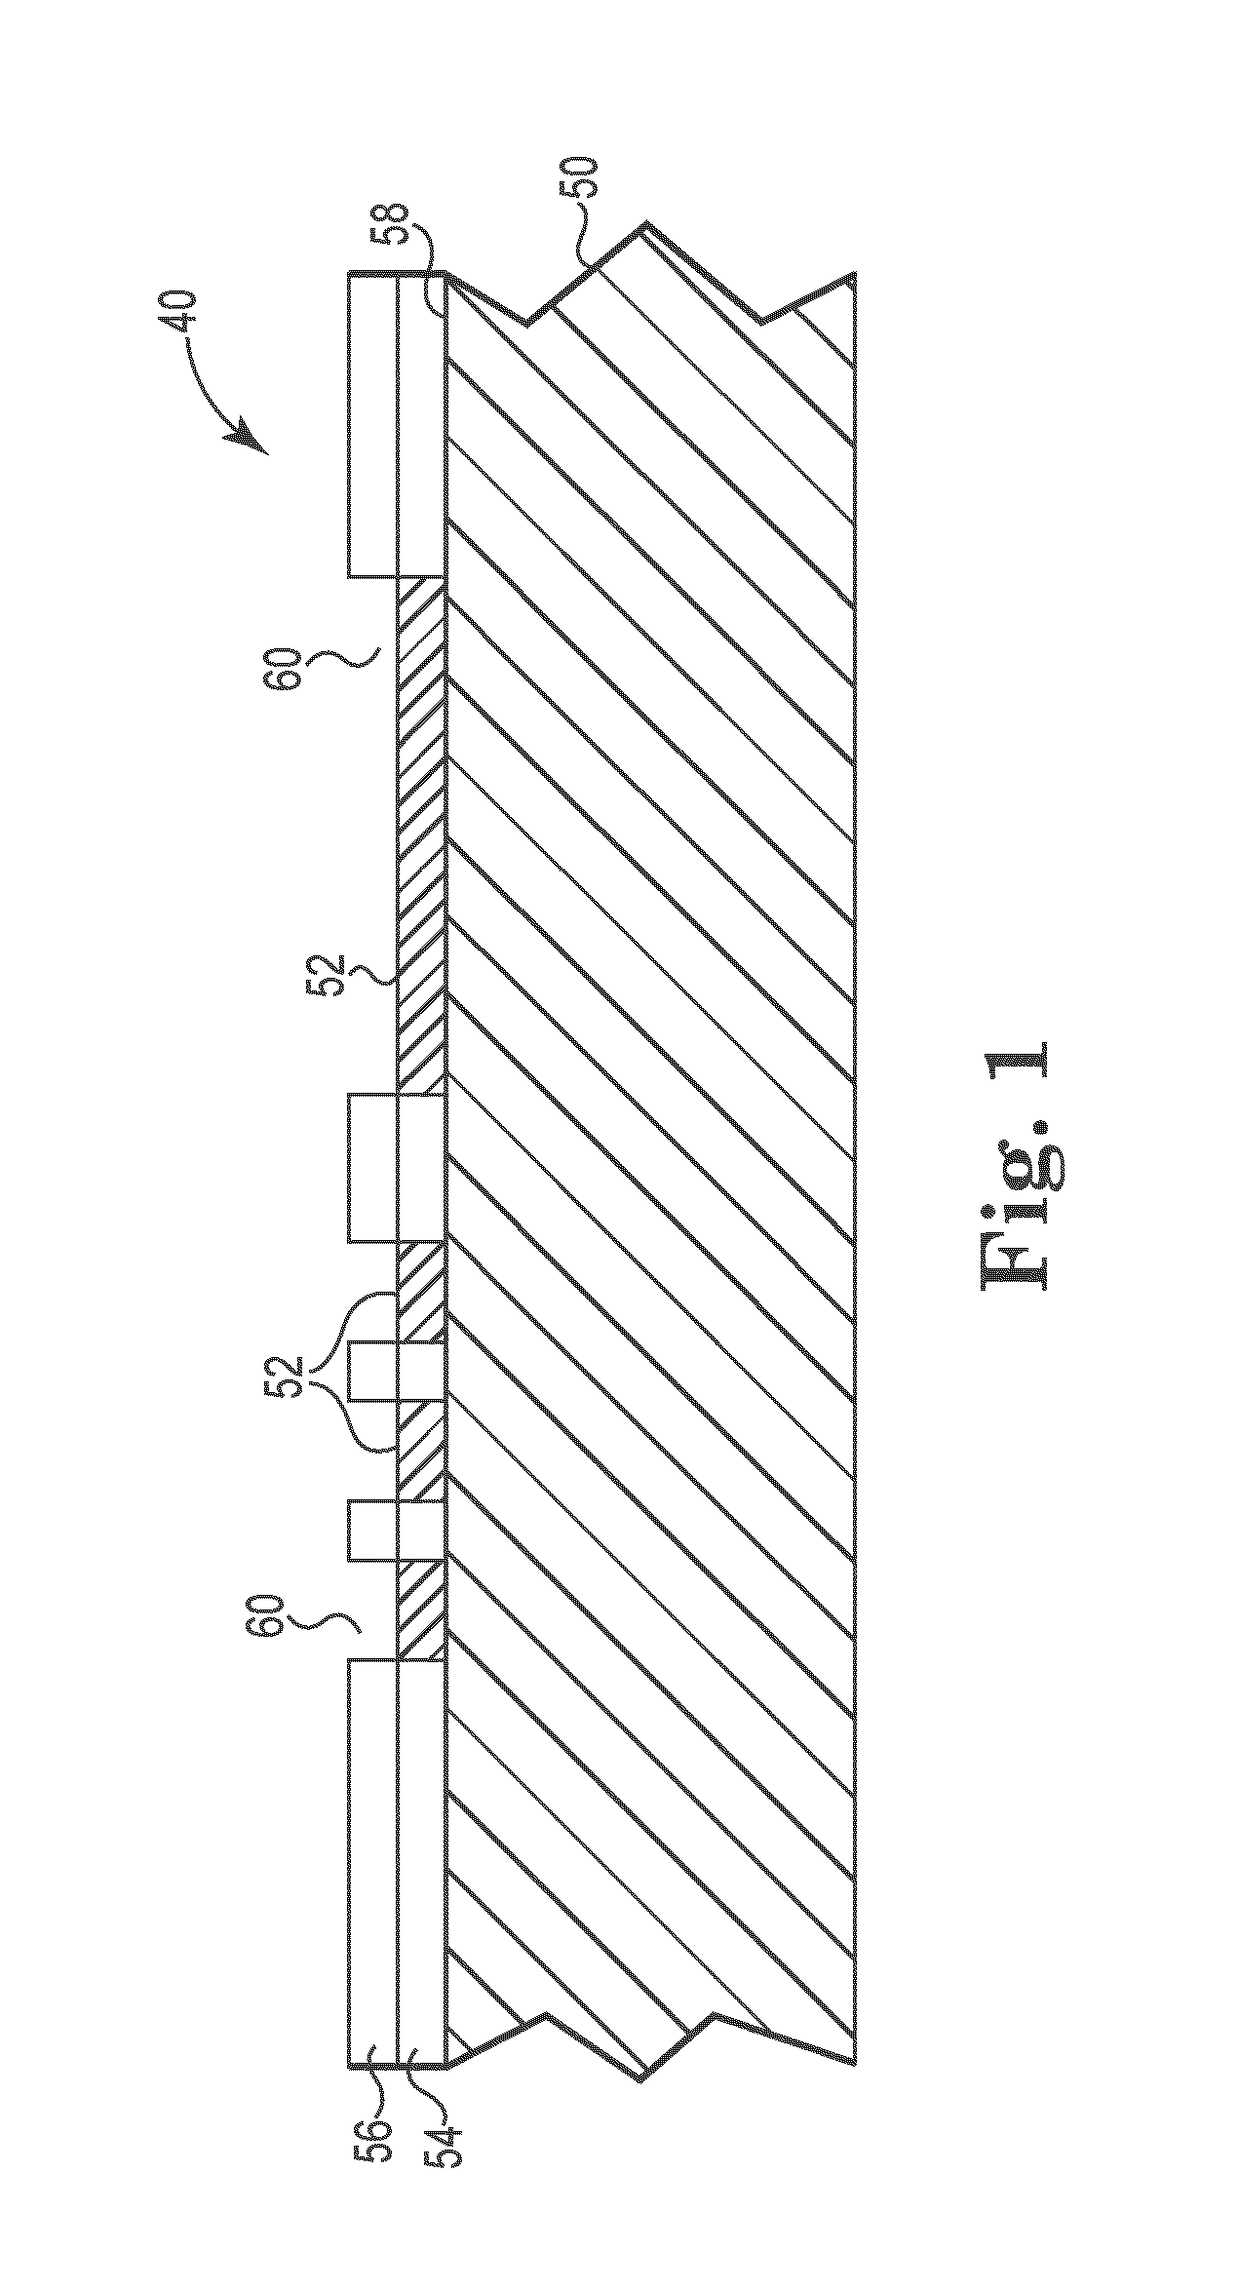 Area array semiconductor device package interconnect structure with optional package-to-package or flexible circuit to package connection